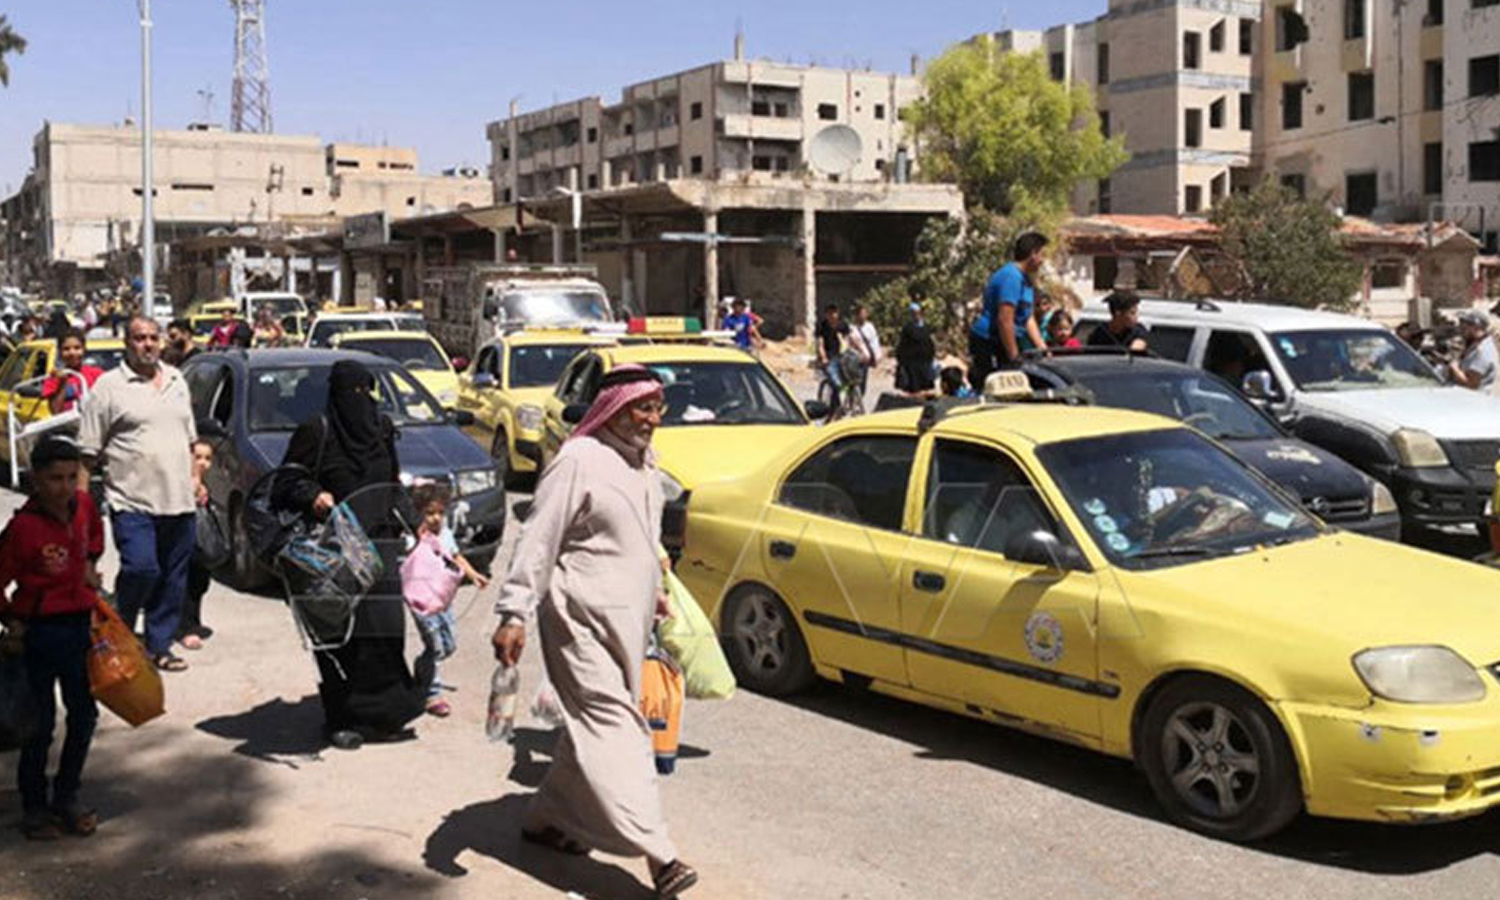 A crowded street with passers-by and taxis in Daraa city, southern Syria - 9 September 2021 (SANA)